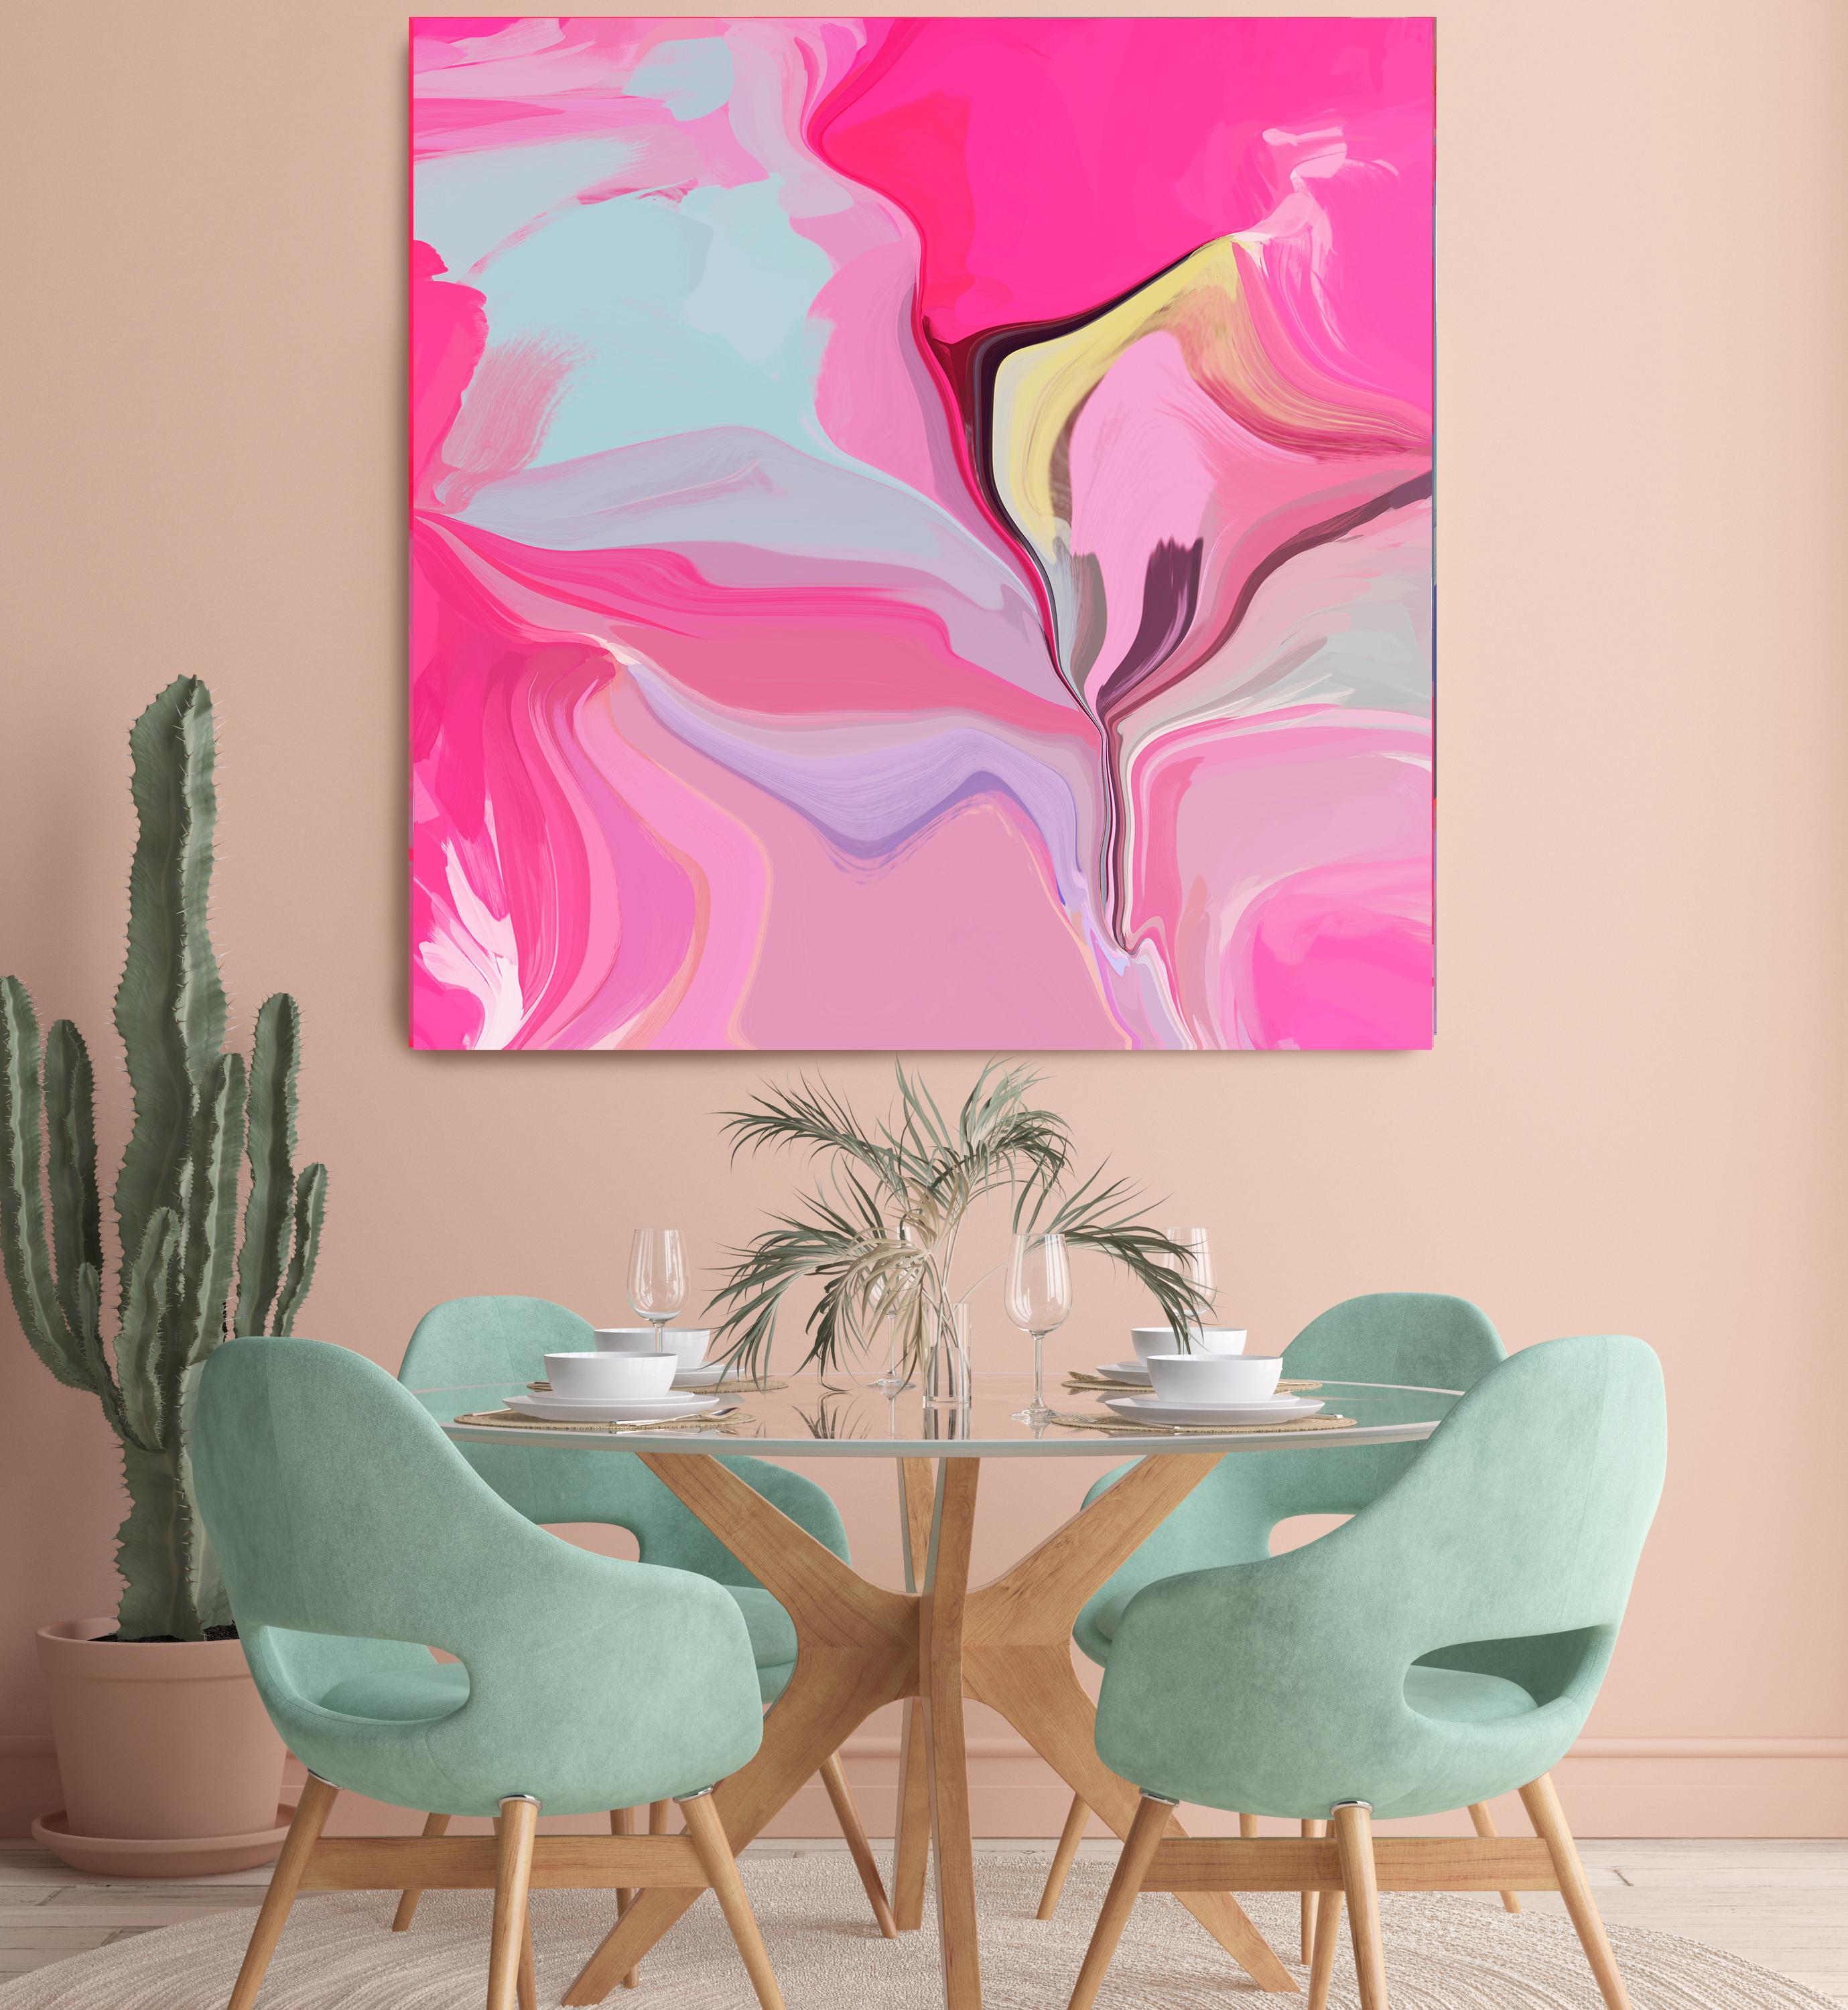 Irena Orlov Abstract Painting - Abstract Hot Pink Painting Mixed Media on Canvas 45x45" Abstract No.13